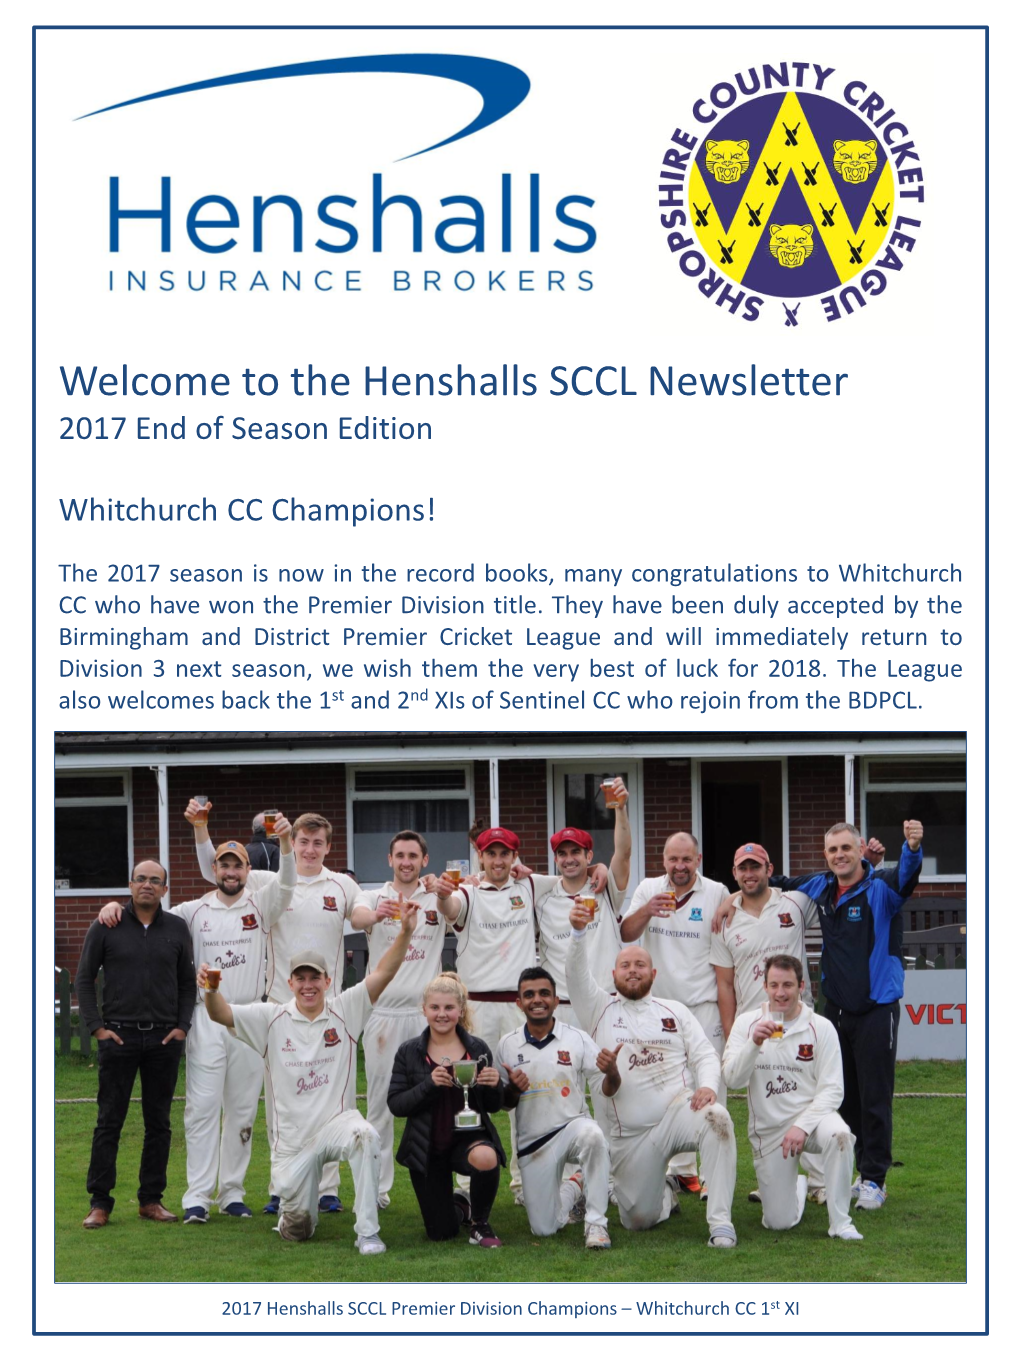 Welcome to the Henshalls SCCL Newsletter 2017 End of Season Edition